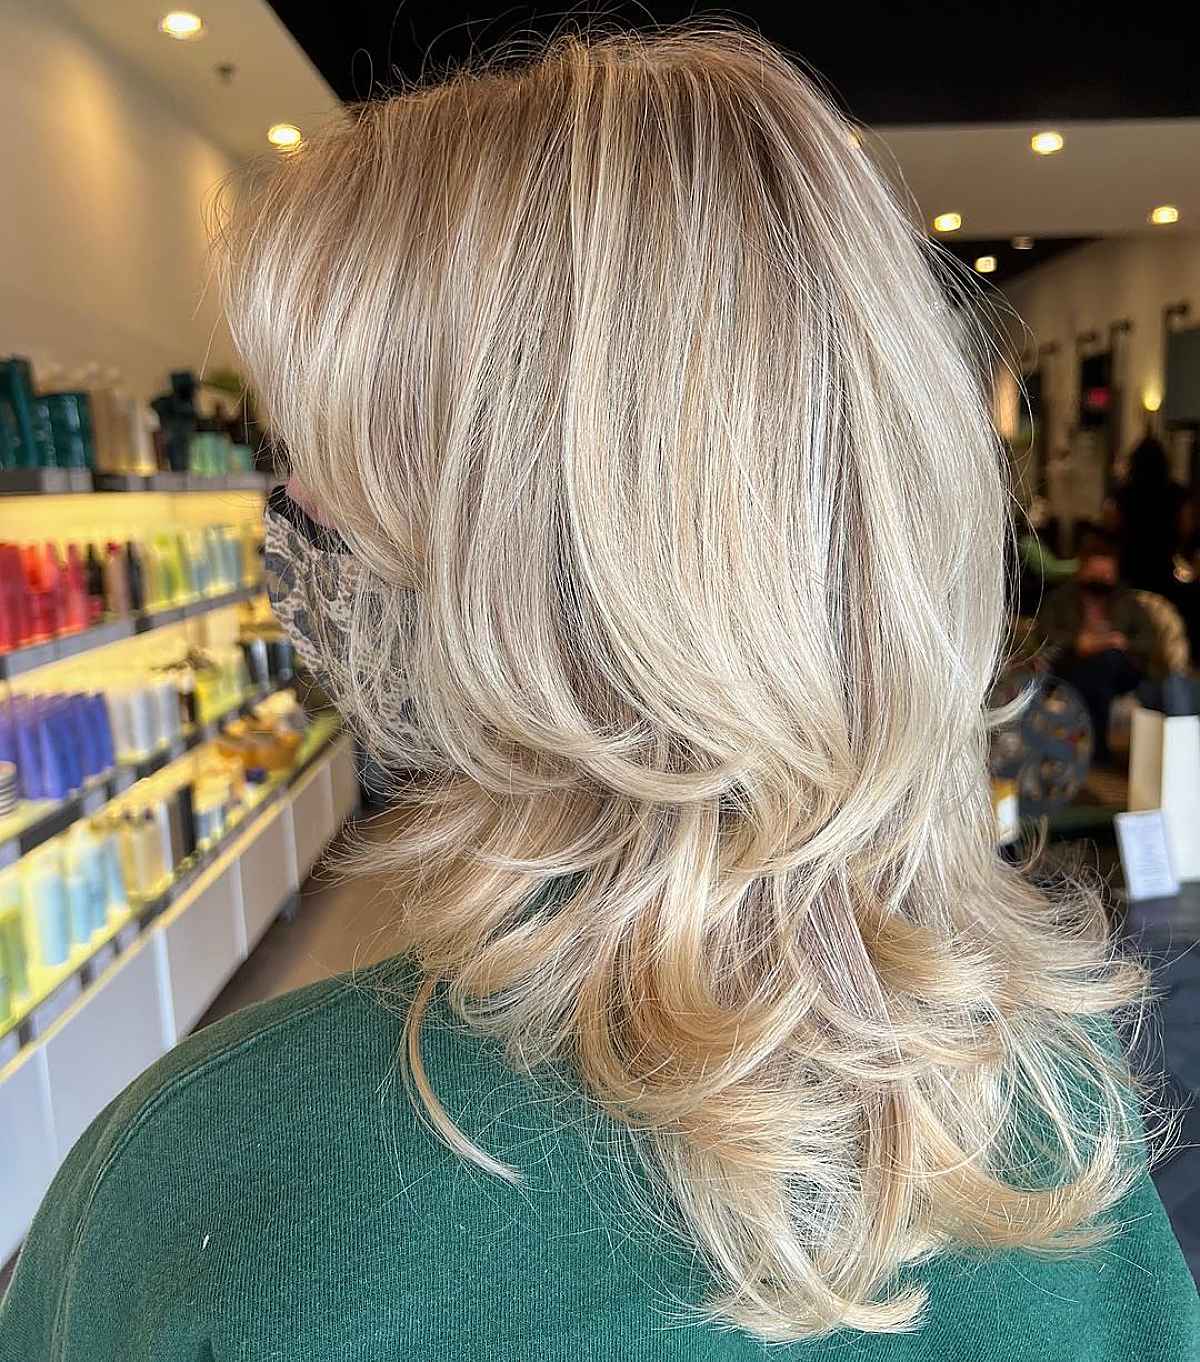 Layered Octopus Style on Blonde Hair